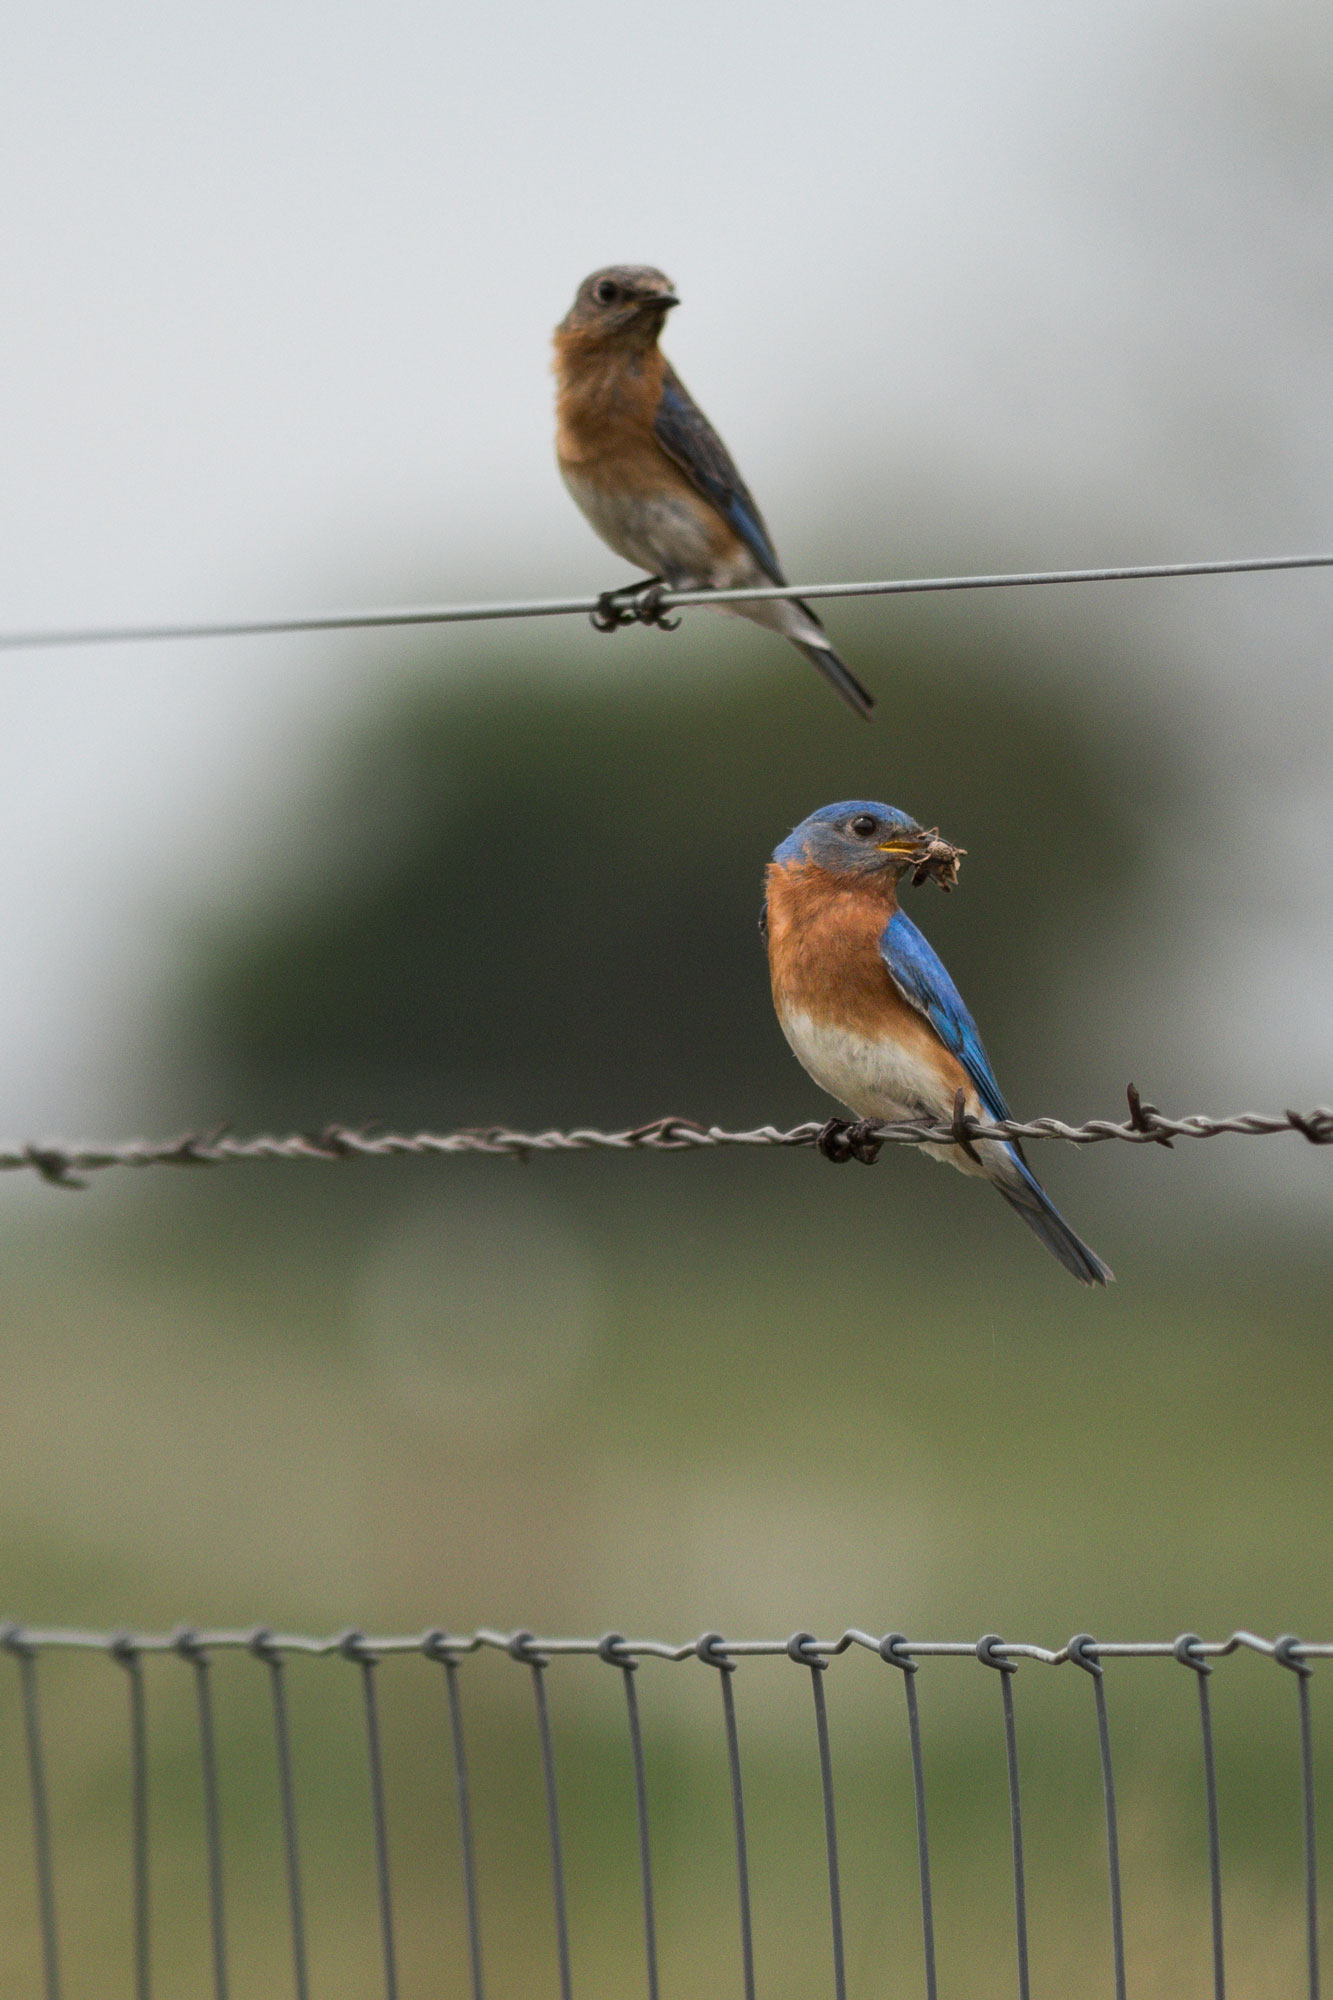 Blue birds on a barbed-wire fence